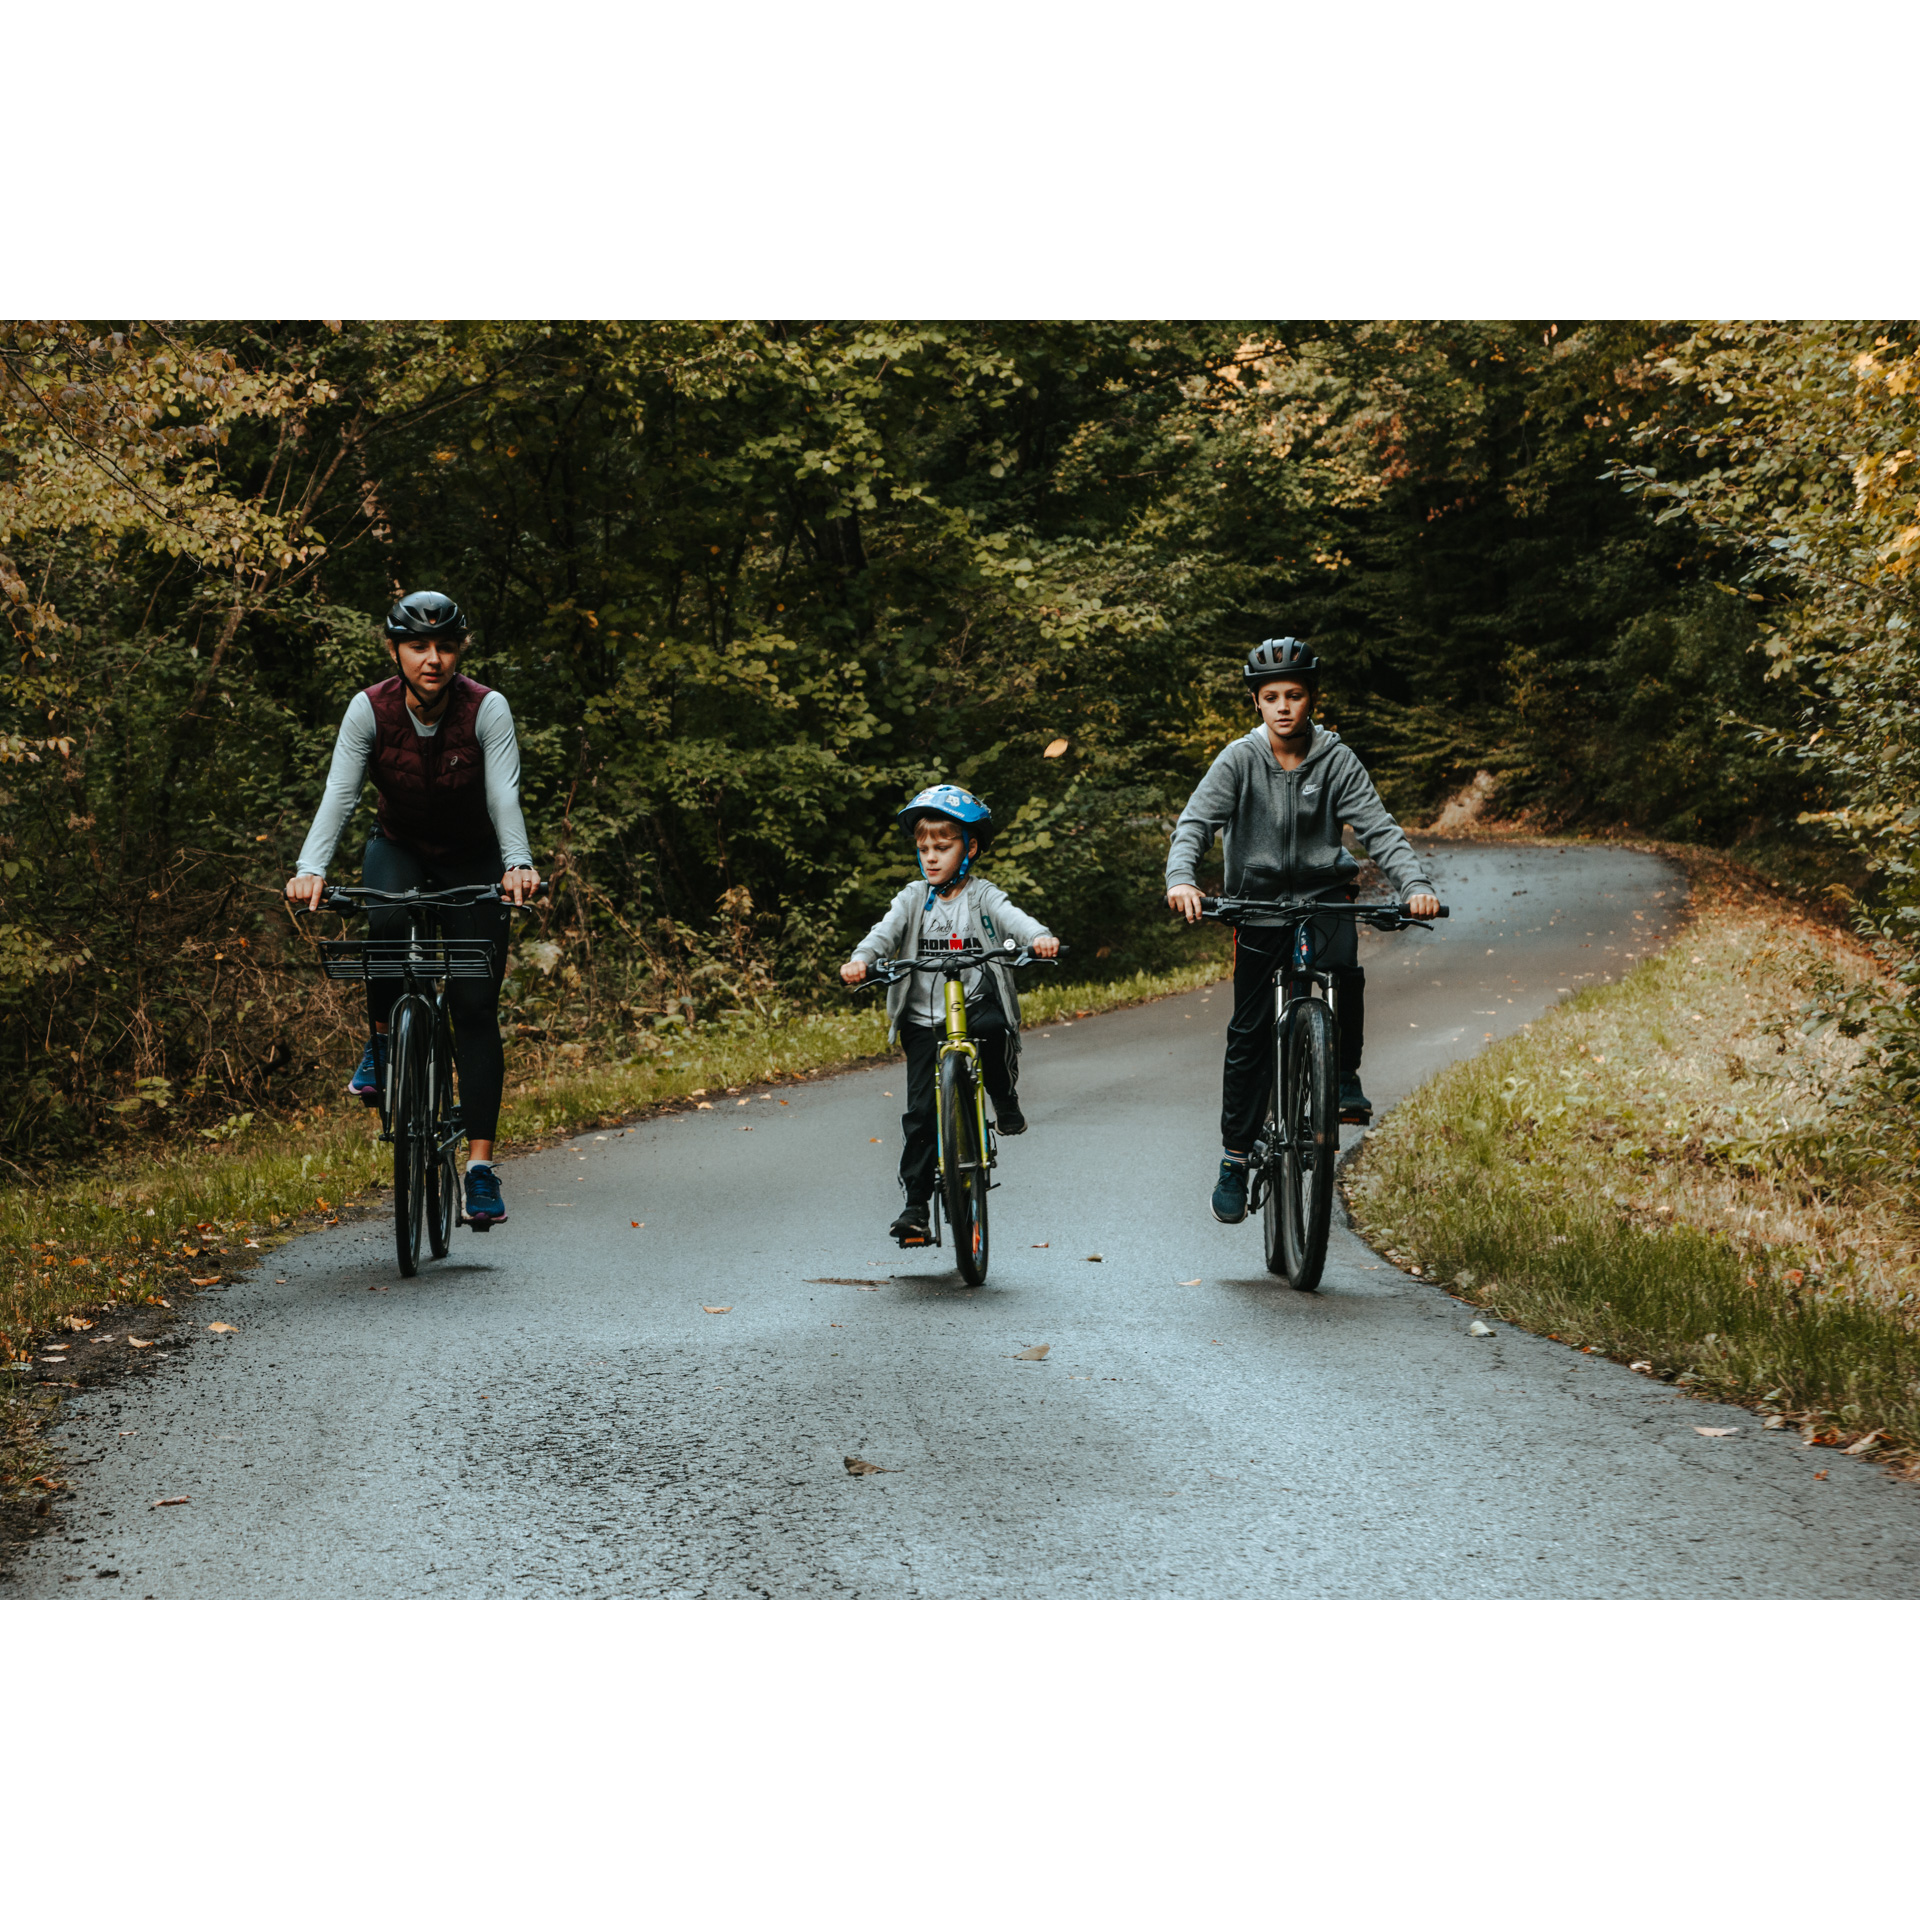 A woman and two boys in helmets cycling along an asphalt road among green trees